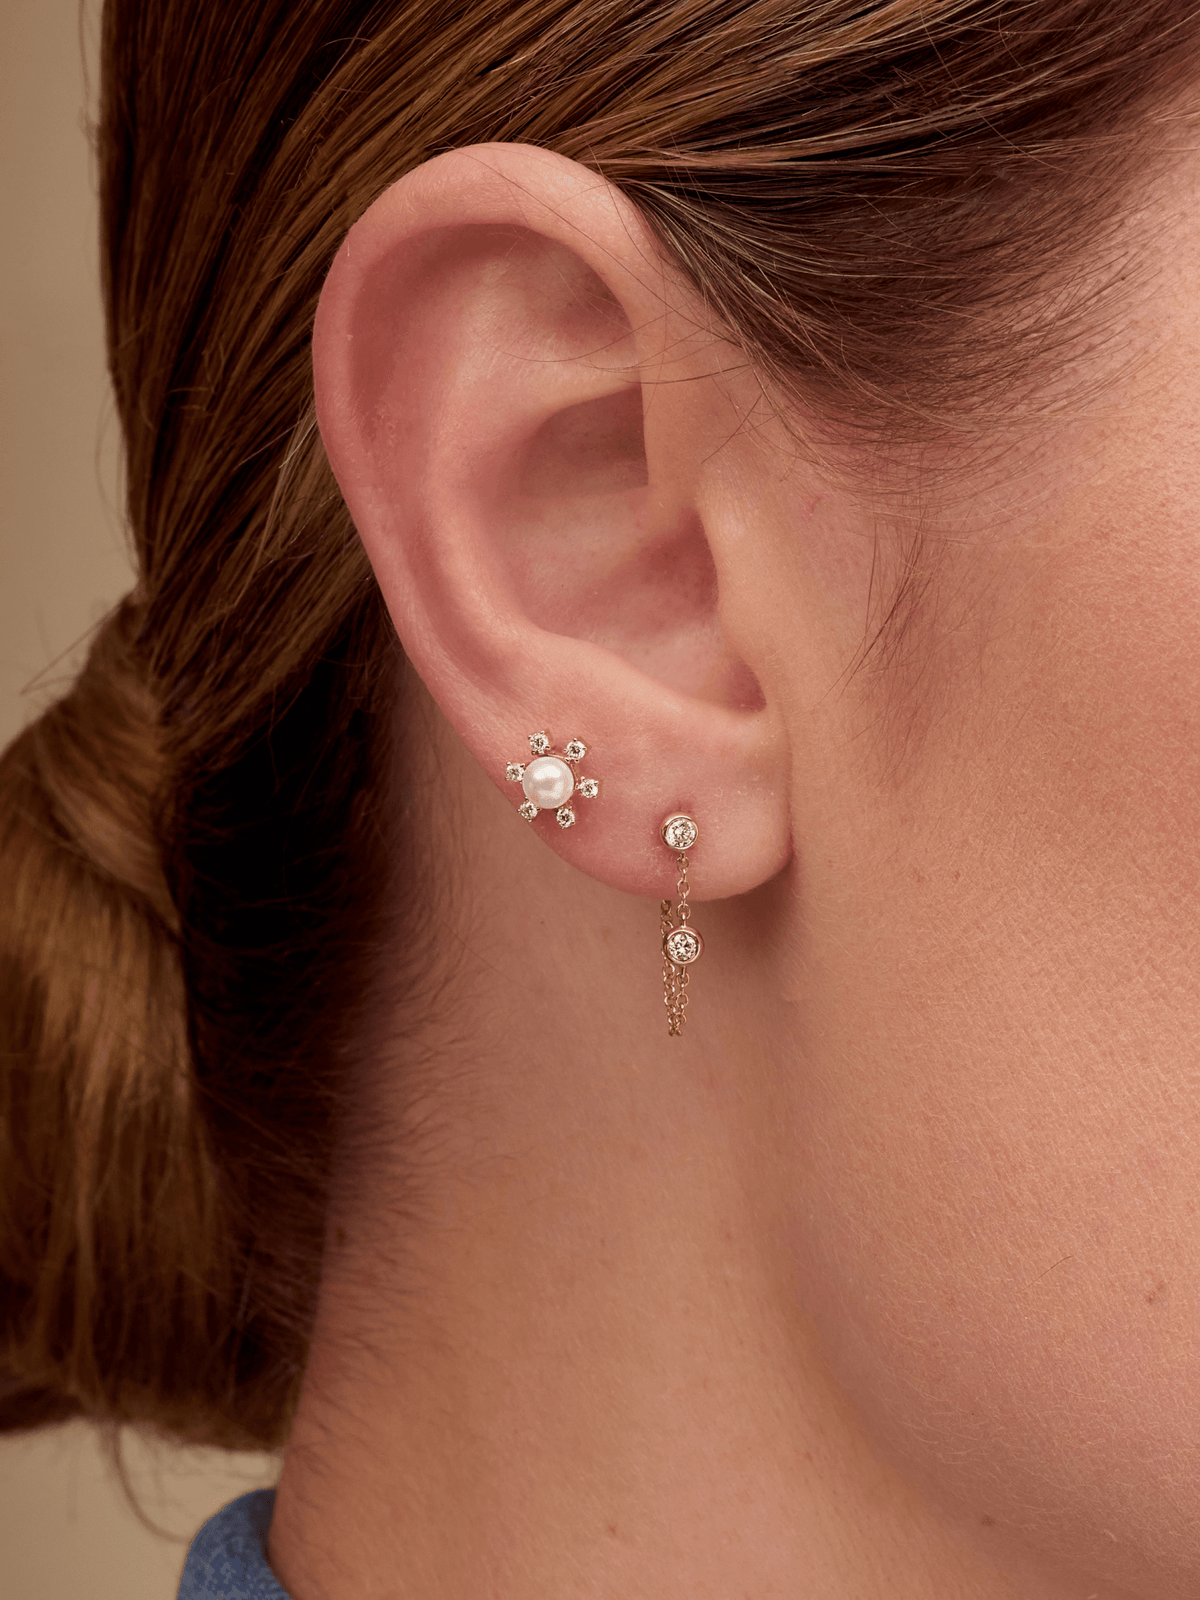 Pearl flower earring paired with diamond chain earring